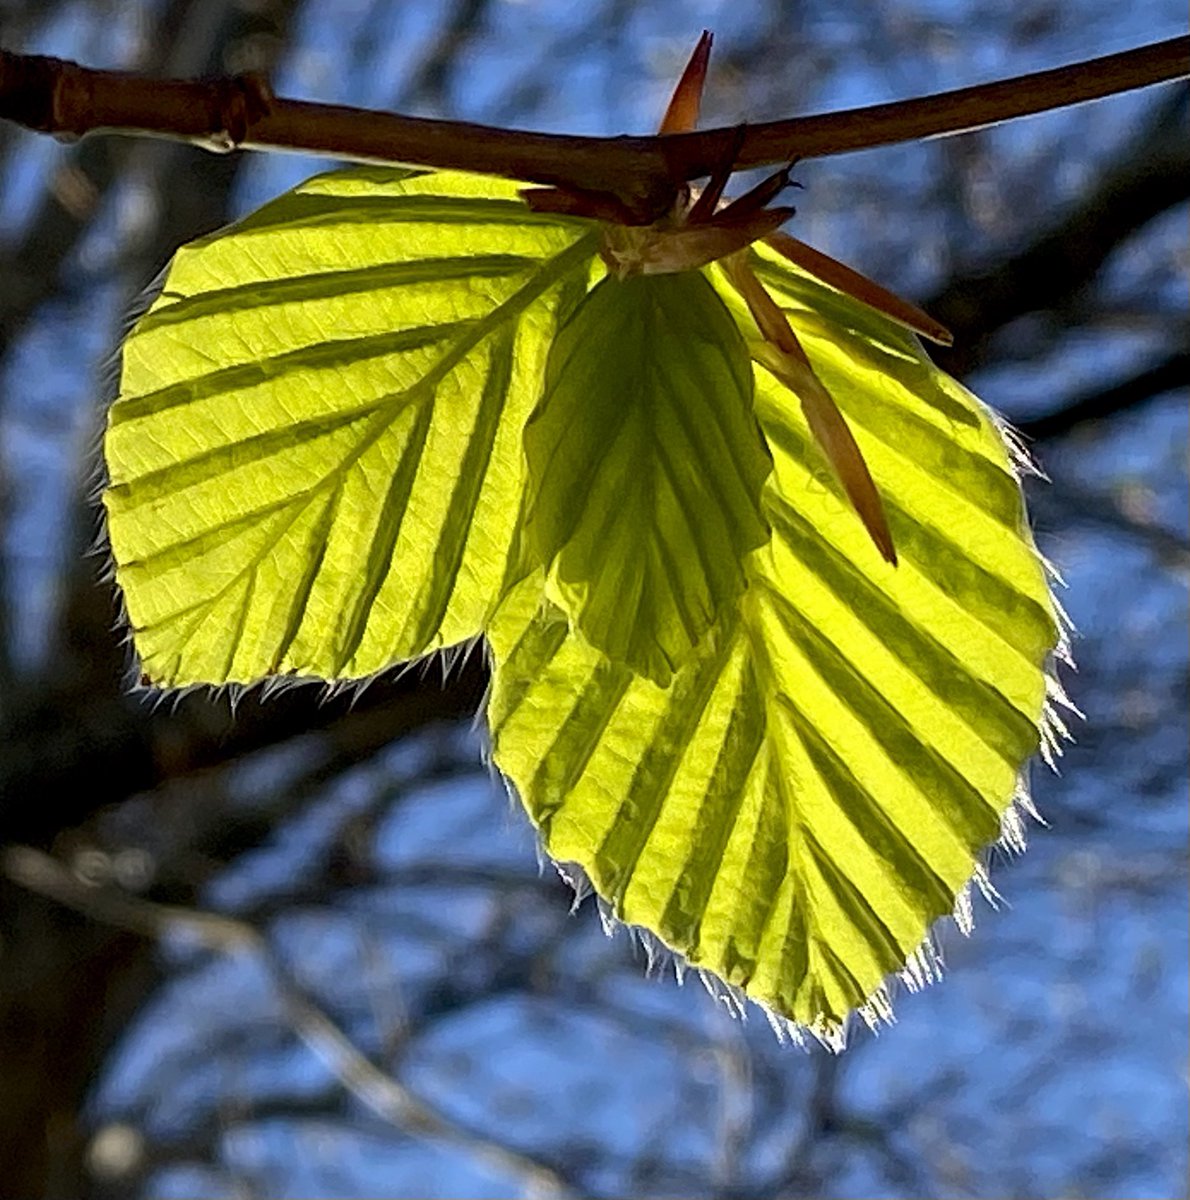 Nothing quite like the intense acid green of new beech leaves bathed in spring sunshine @BSBIbotany @wildflower_hour @WoodlandTrust